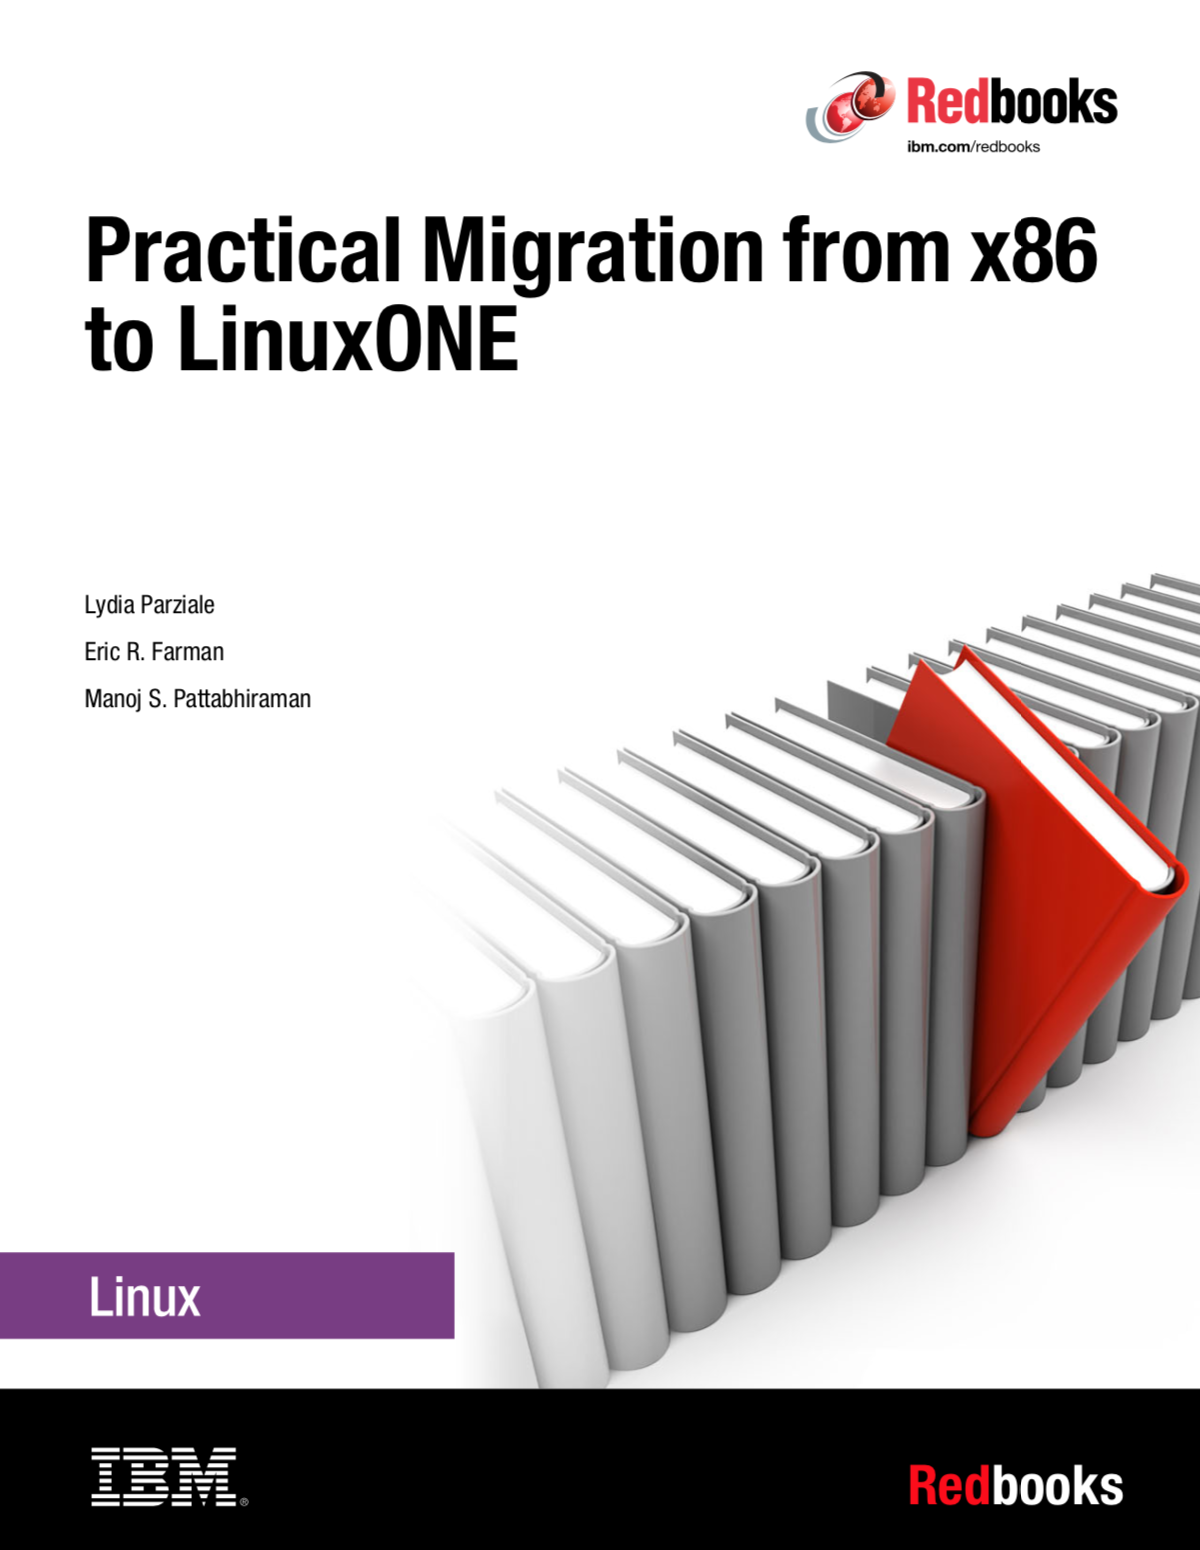 Practical Migration from x86 to LinuxONE